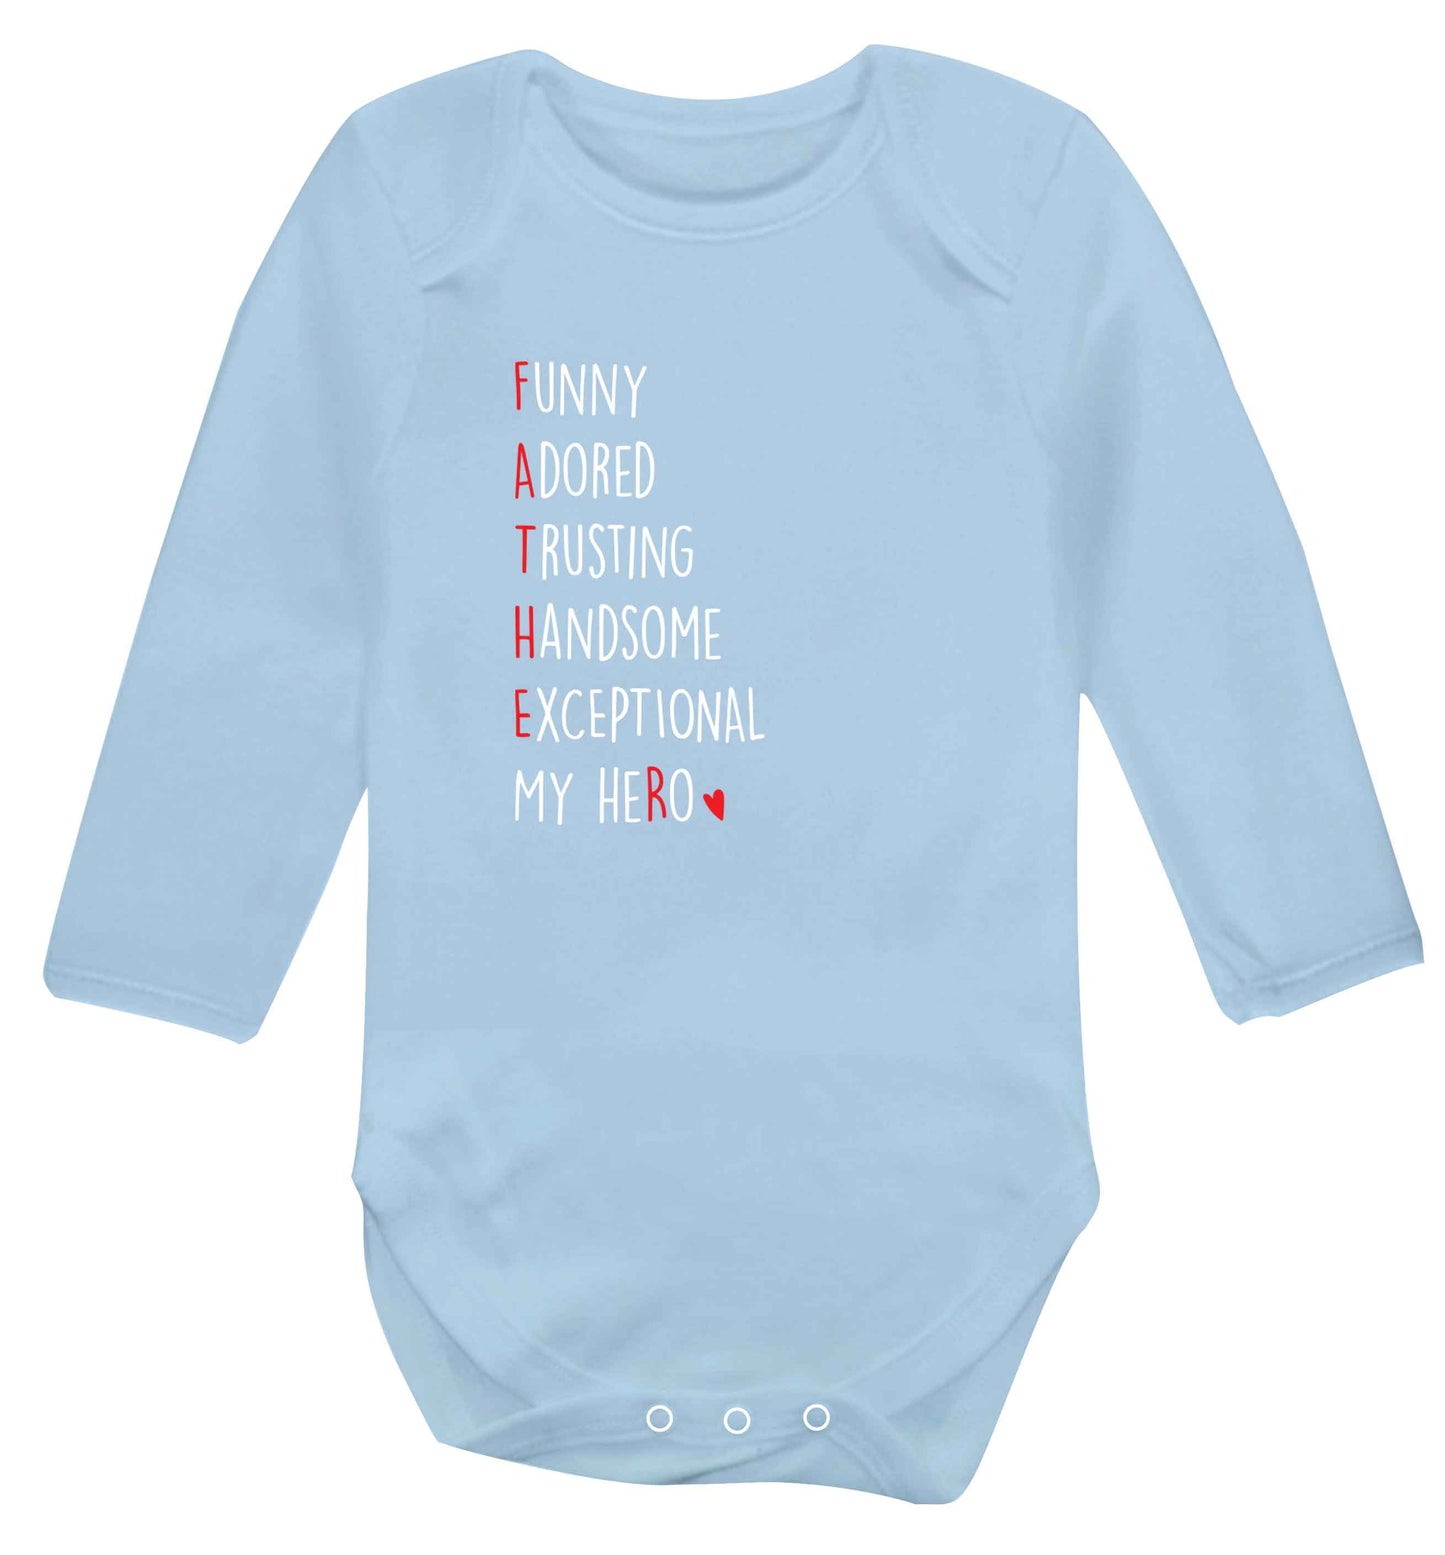 Father meaning hero acrostic poem baby vest long sleeved pale blue 6-12 months